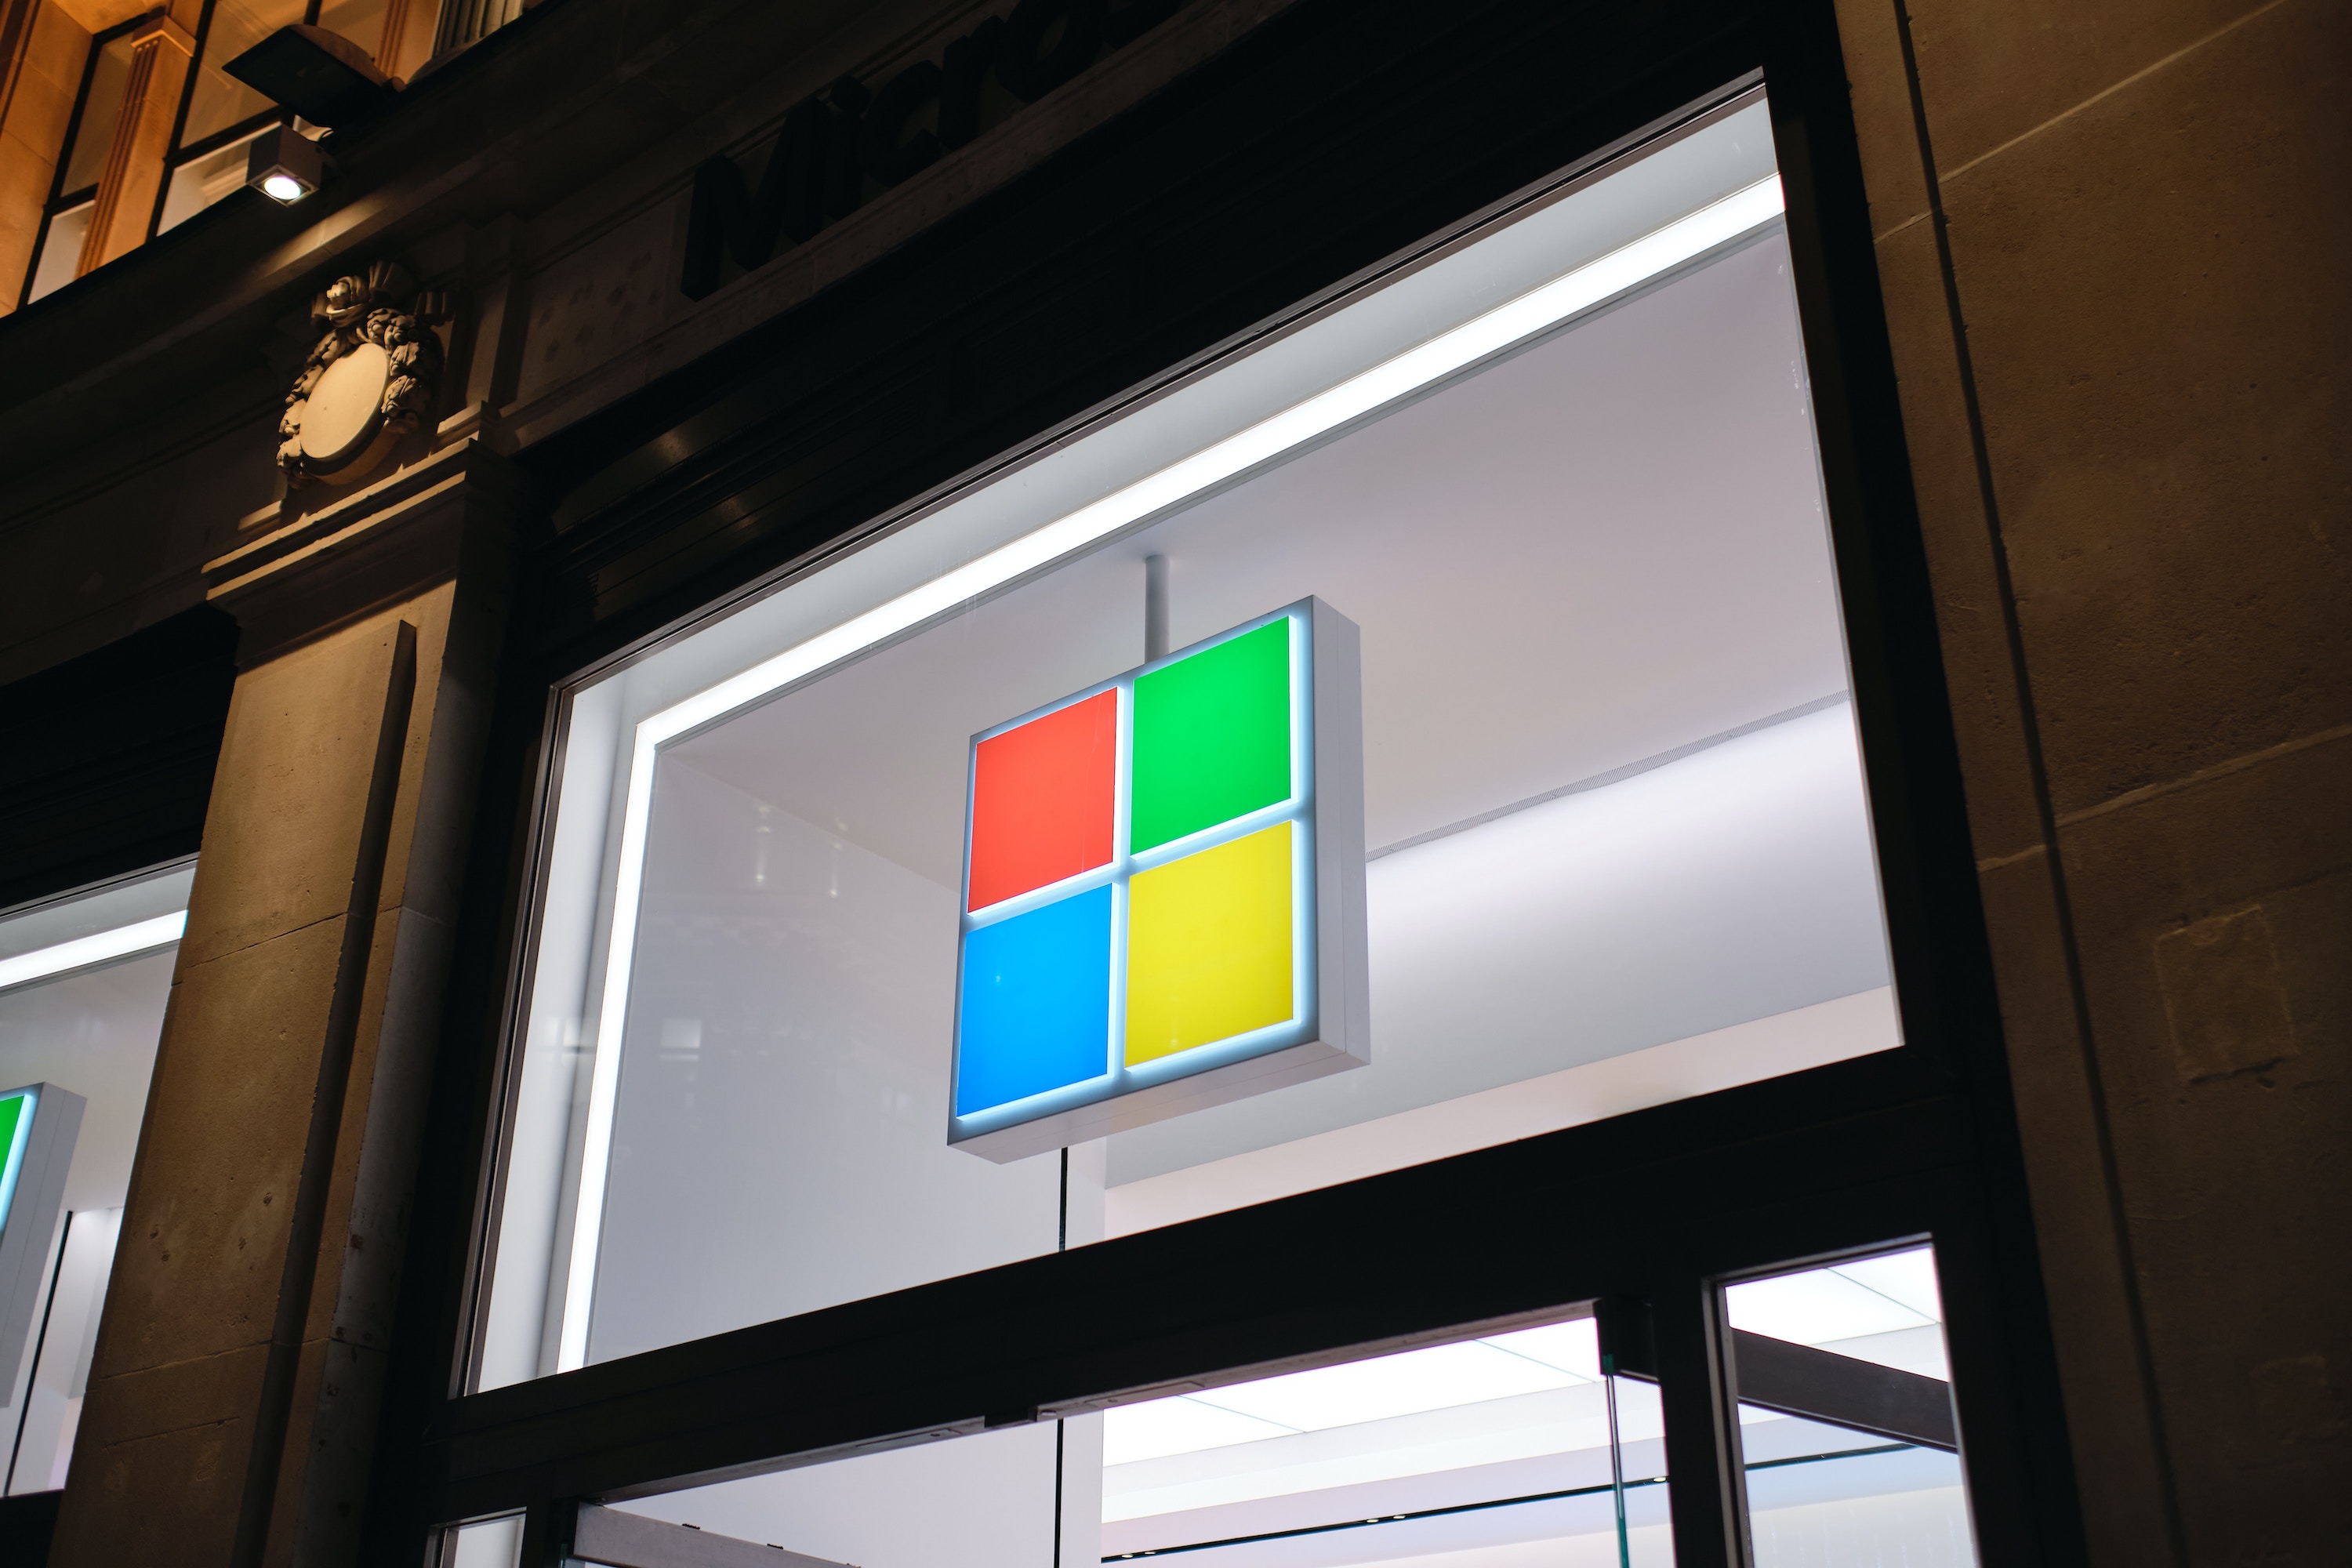 Microsoft continues showing positive trends